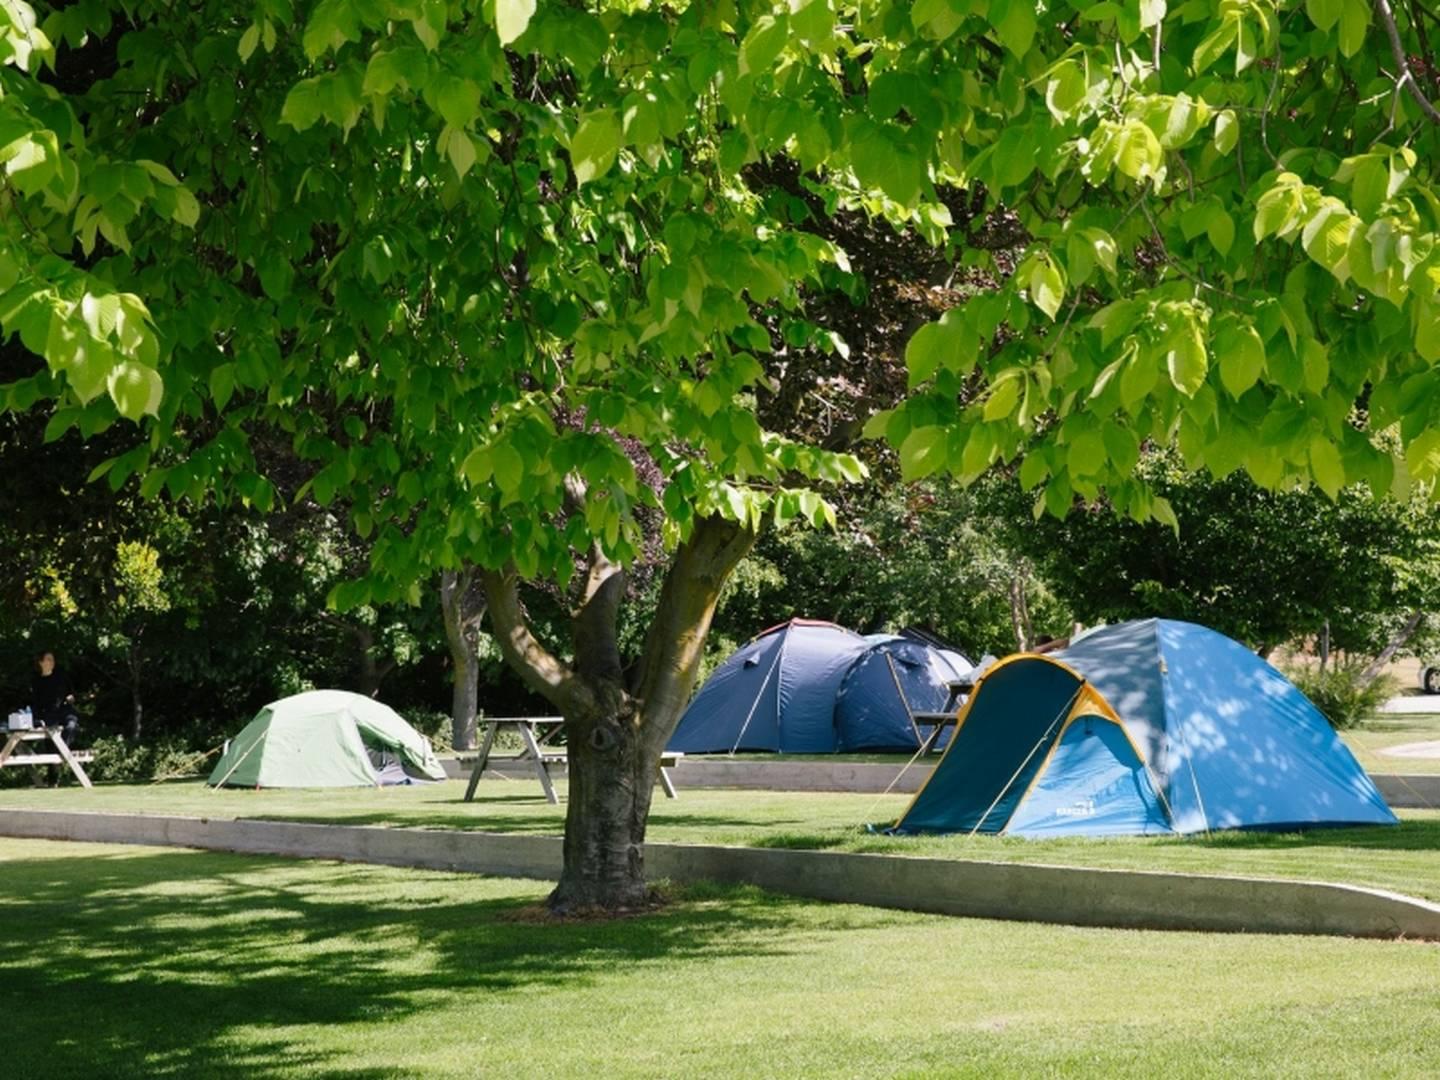 Tents set up on grass site